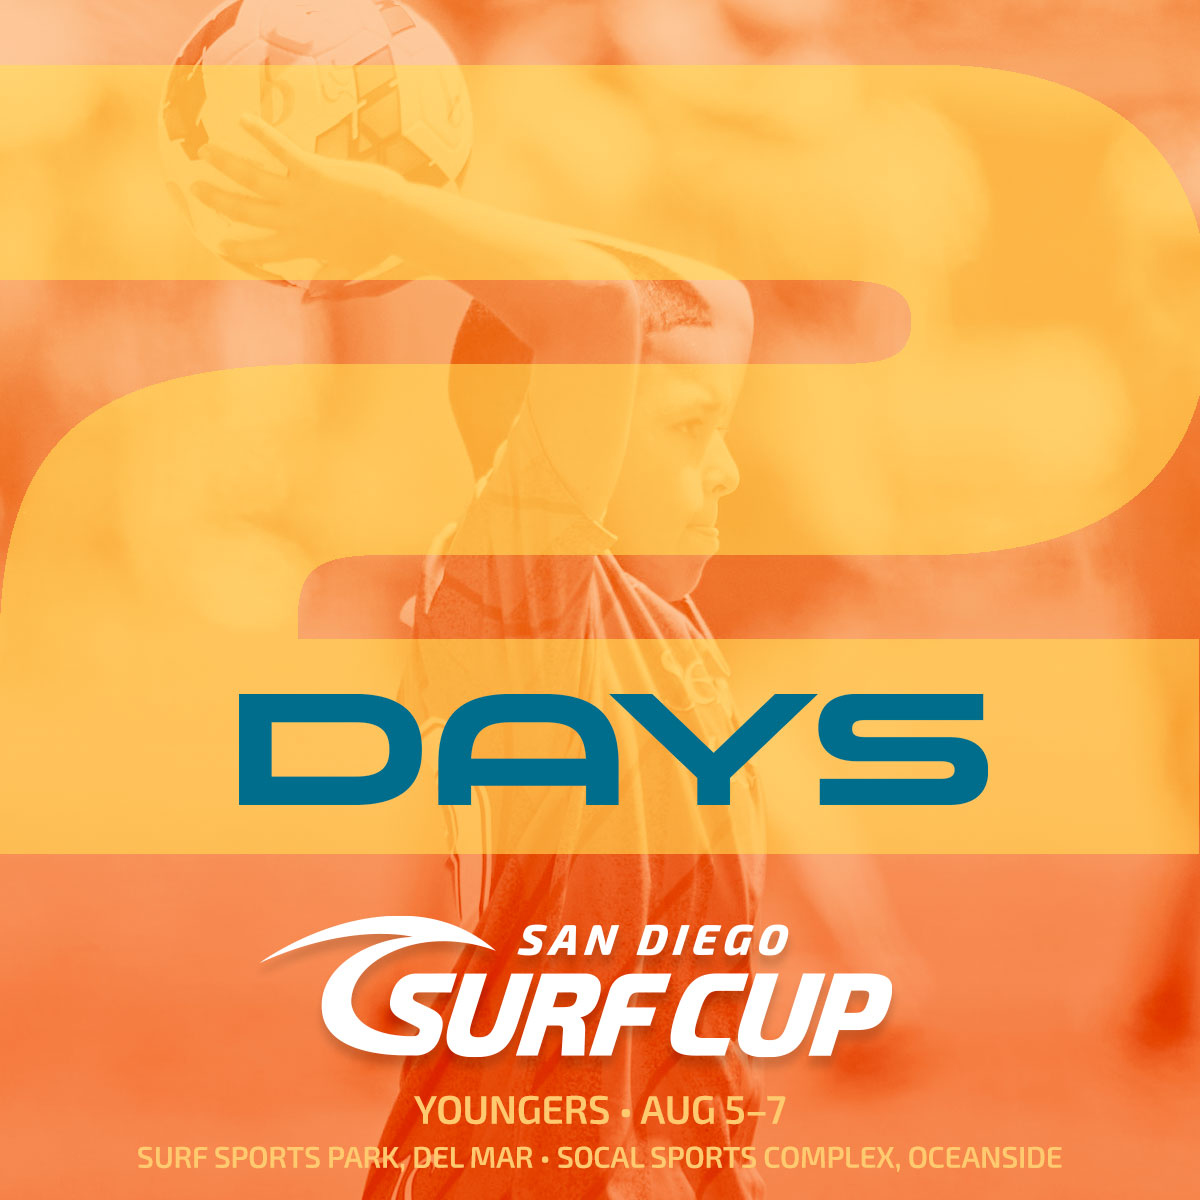 We are TWO DAYS out from our YOUNGERS event - Are you ready? #SurfCup #BestOfTheBest